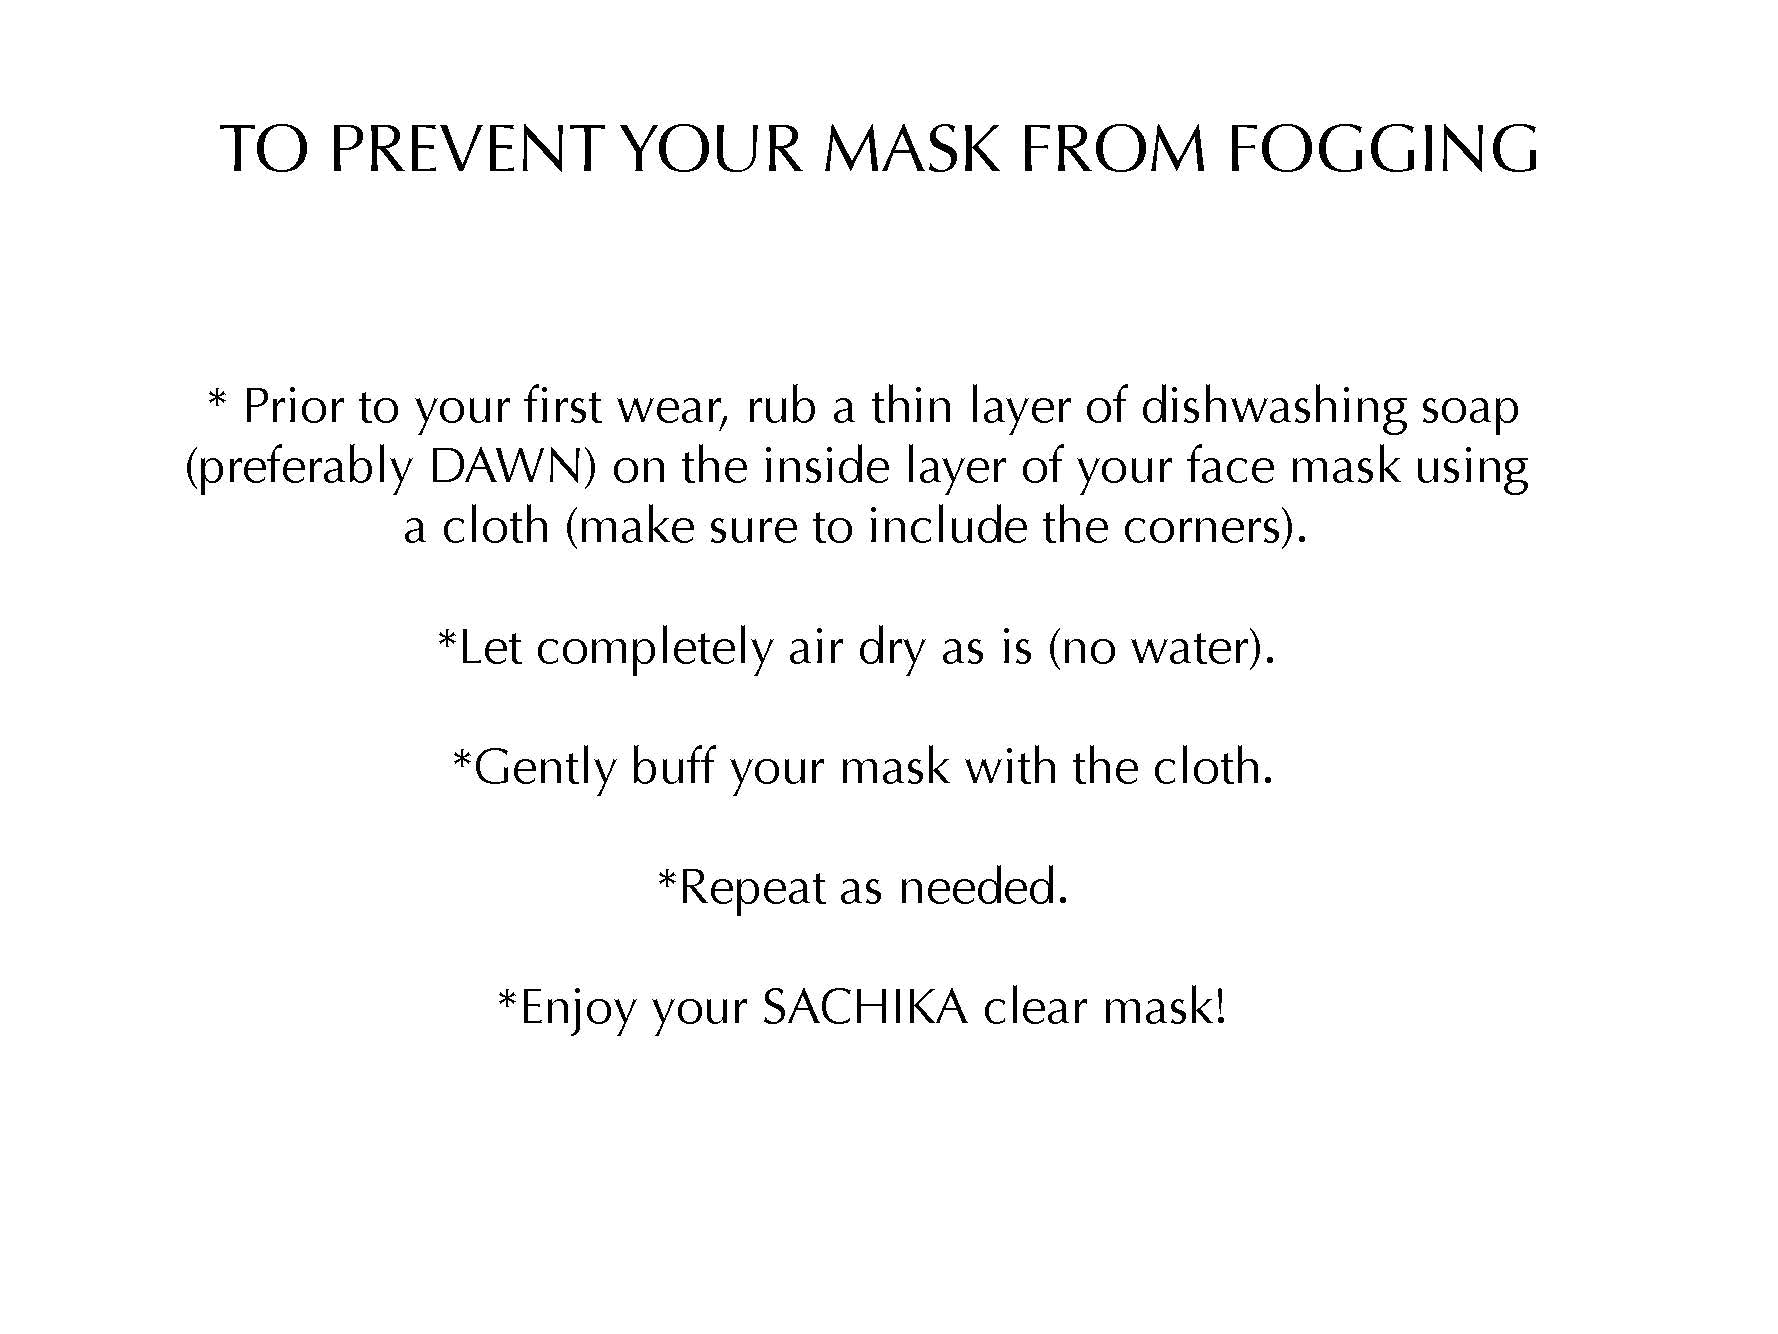 Reveal Face Mask 100% Transparent Clear Mask by SACHIKA Made in the USA - SACHIKA® - Official Site 